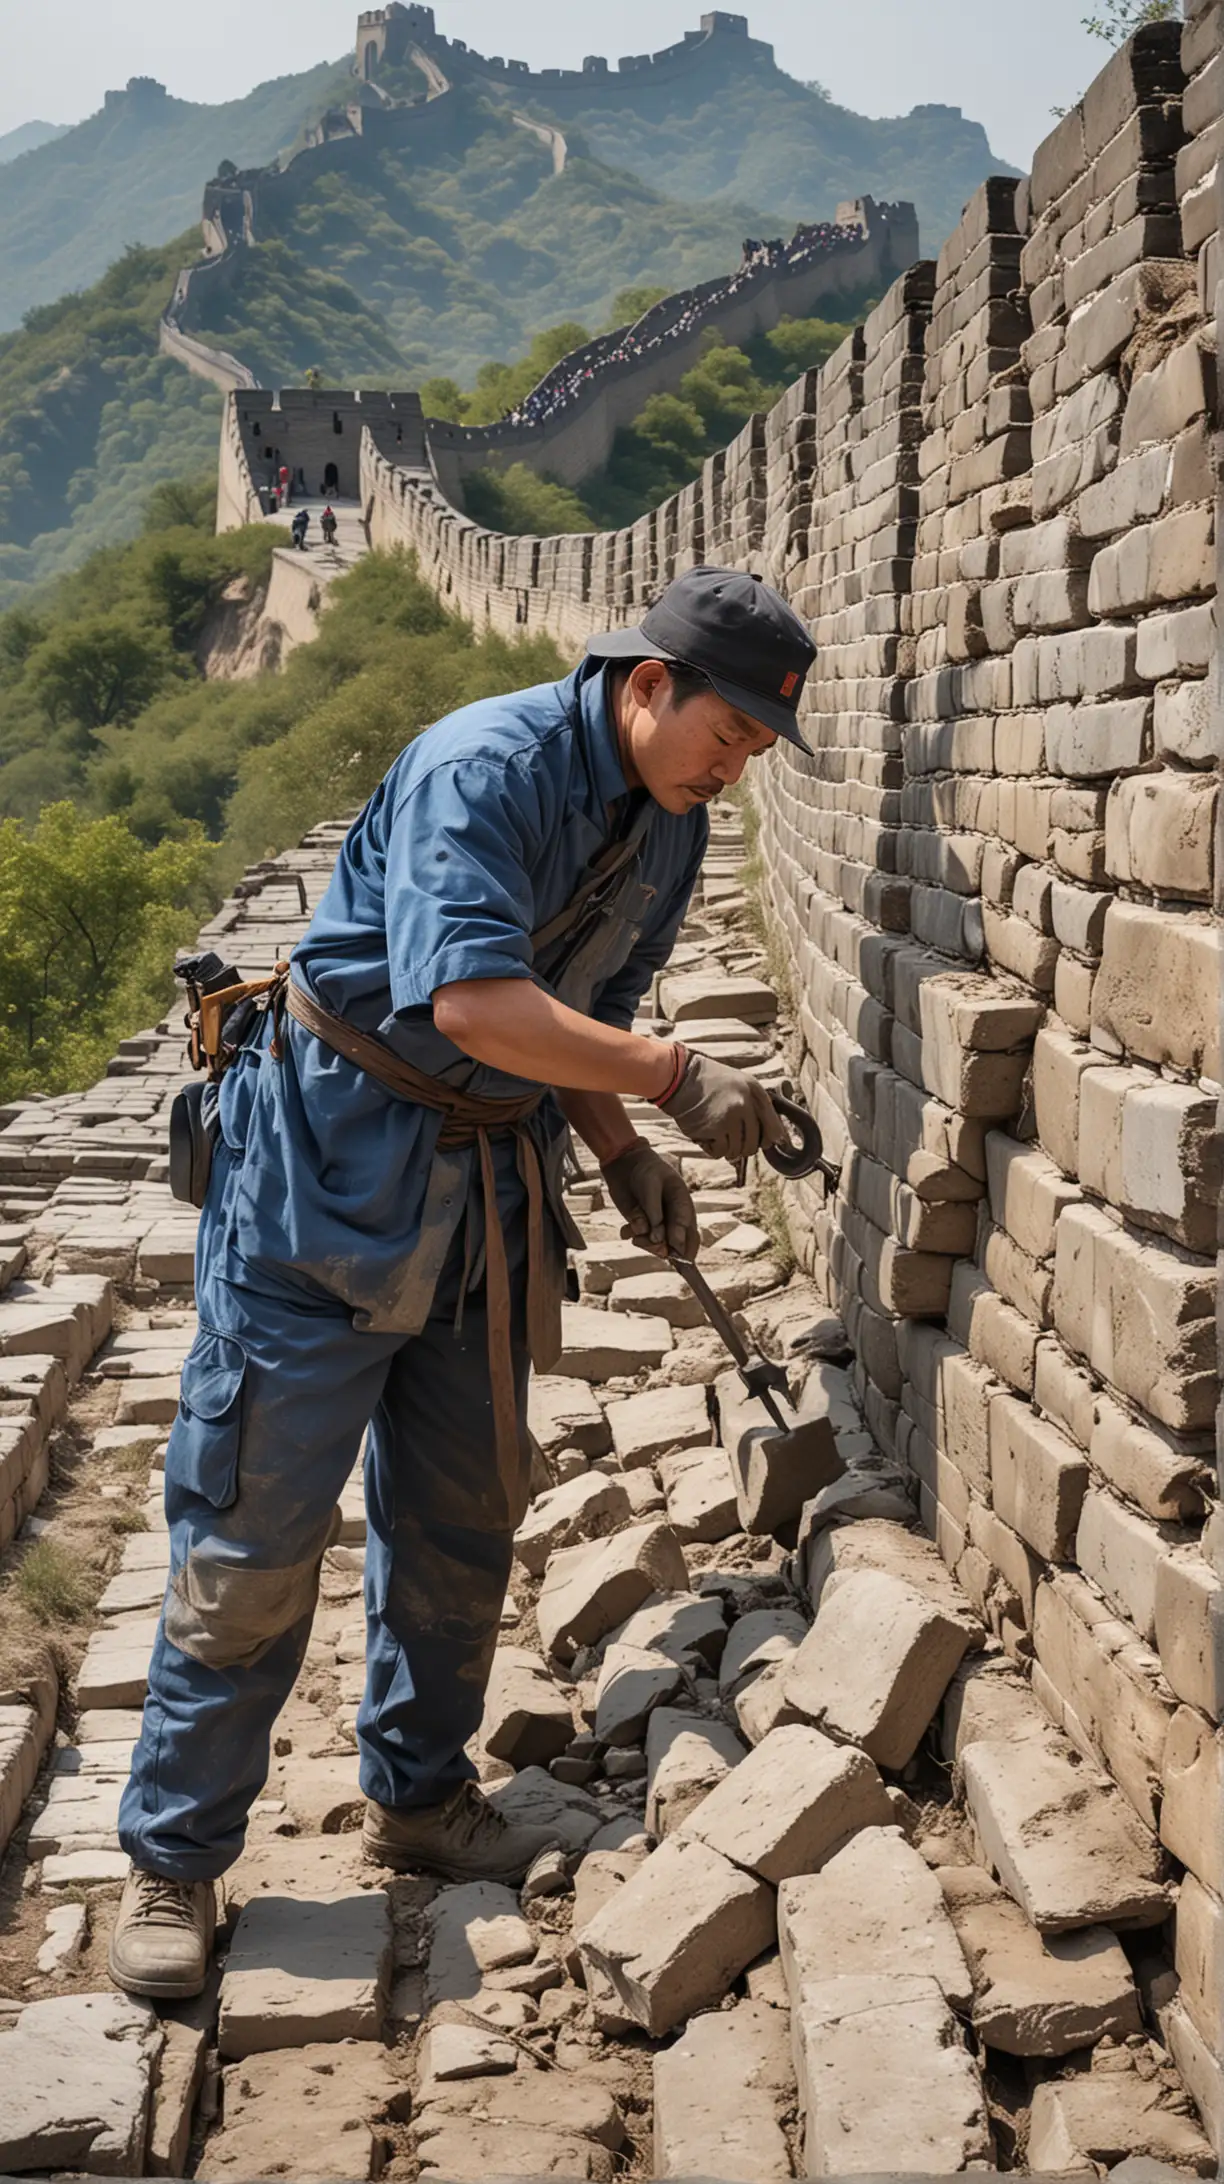 Restoration Efforts: Show workers engaged in restoration and preservation efforts, repairing damaged sections and maintaining the integrity of the Great Wall for future generations. Hyper realistic